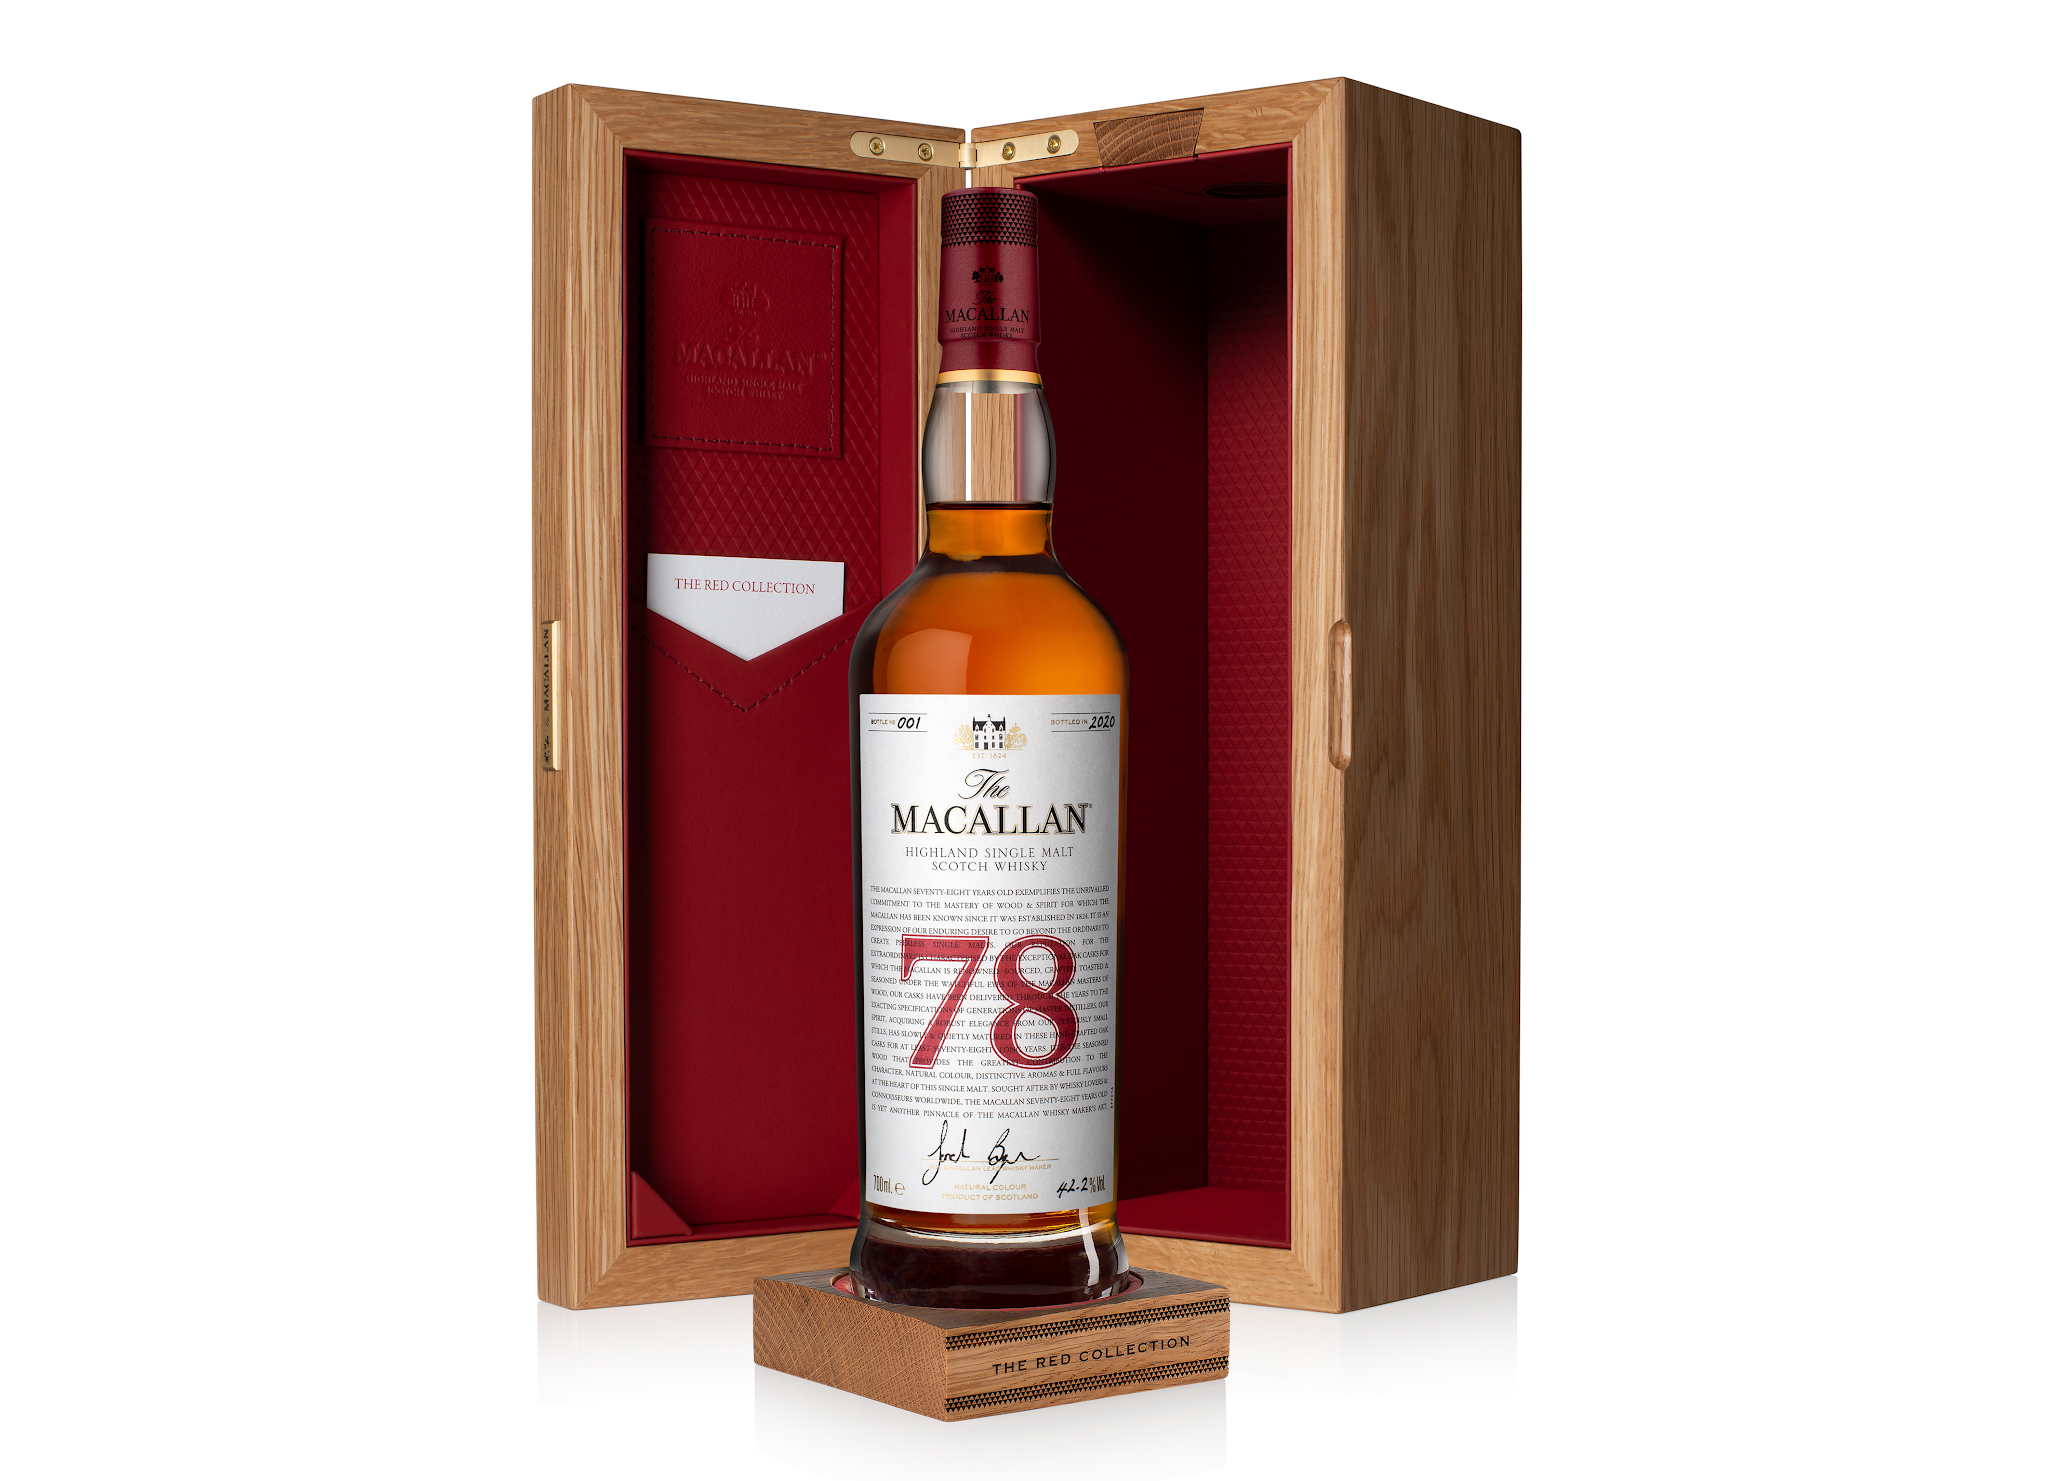 The Whisky Business The Macallan Launches Its Oldest Ever Expressions As Part Of New Collection